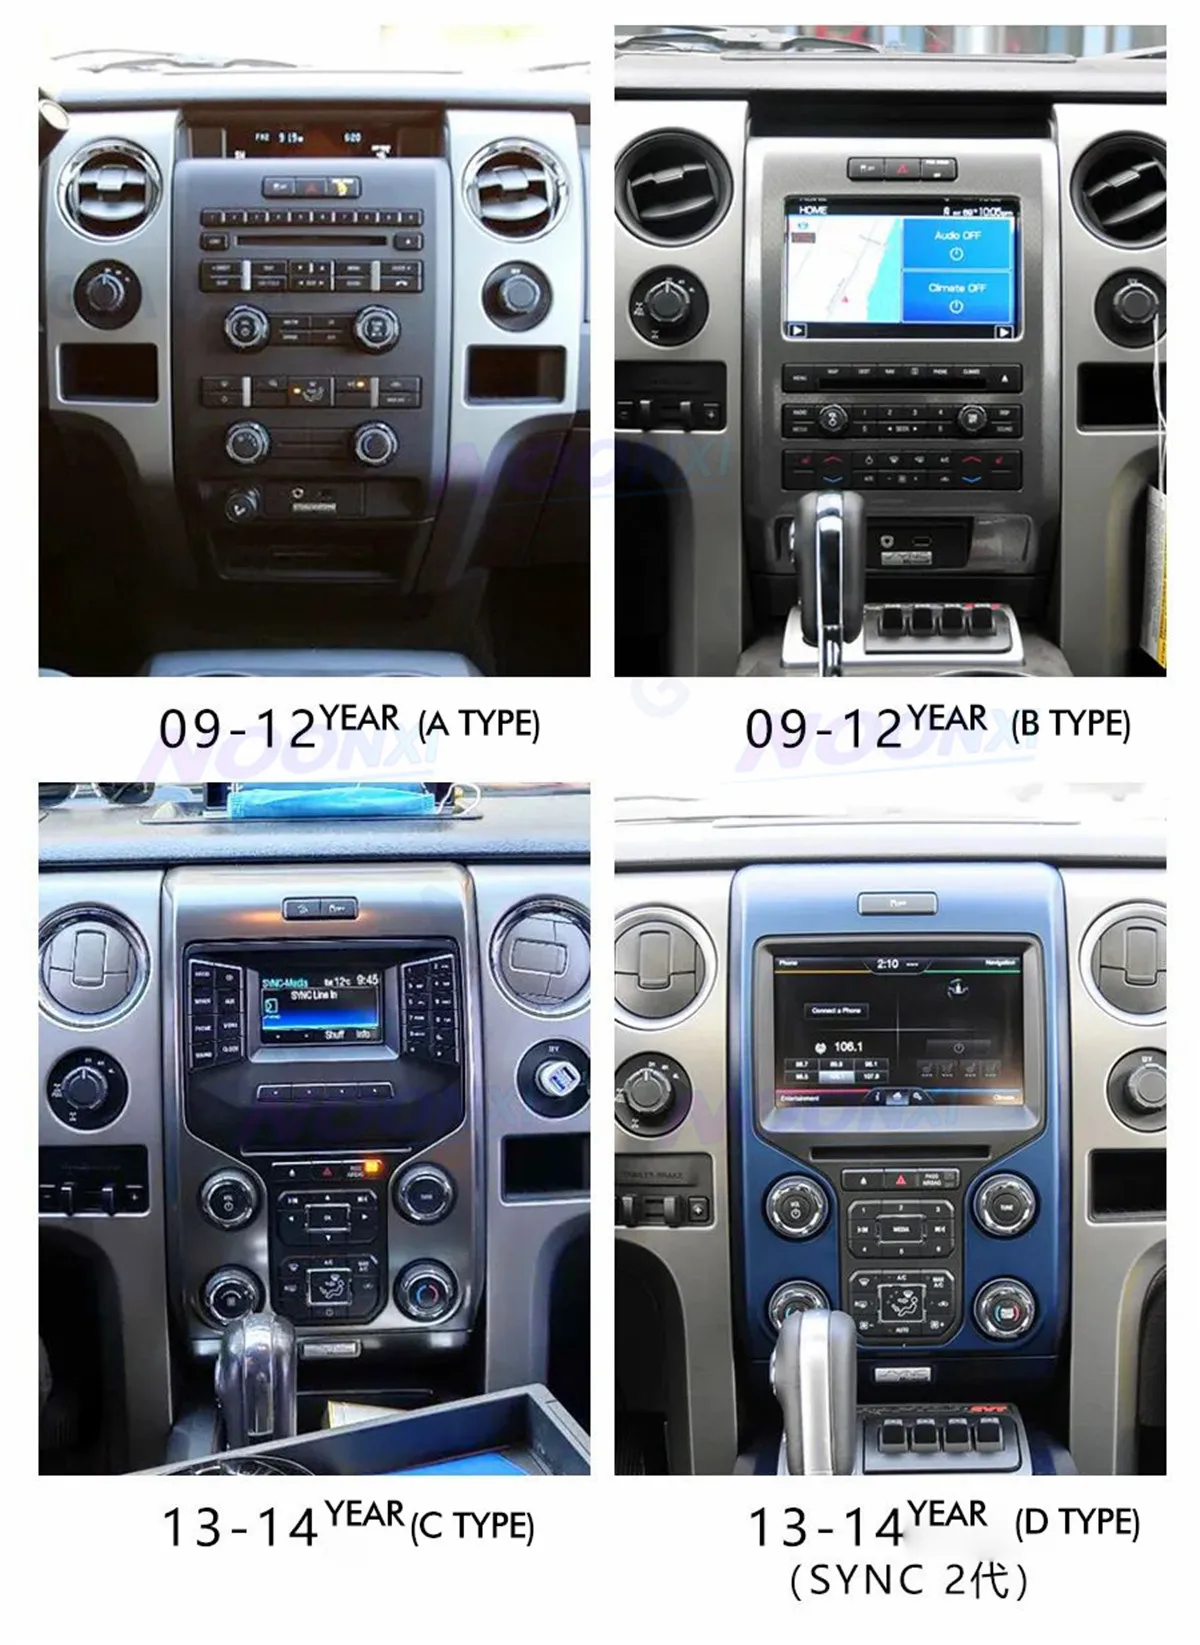 I upgraded my R52 to Bluetooth connection with the original radio